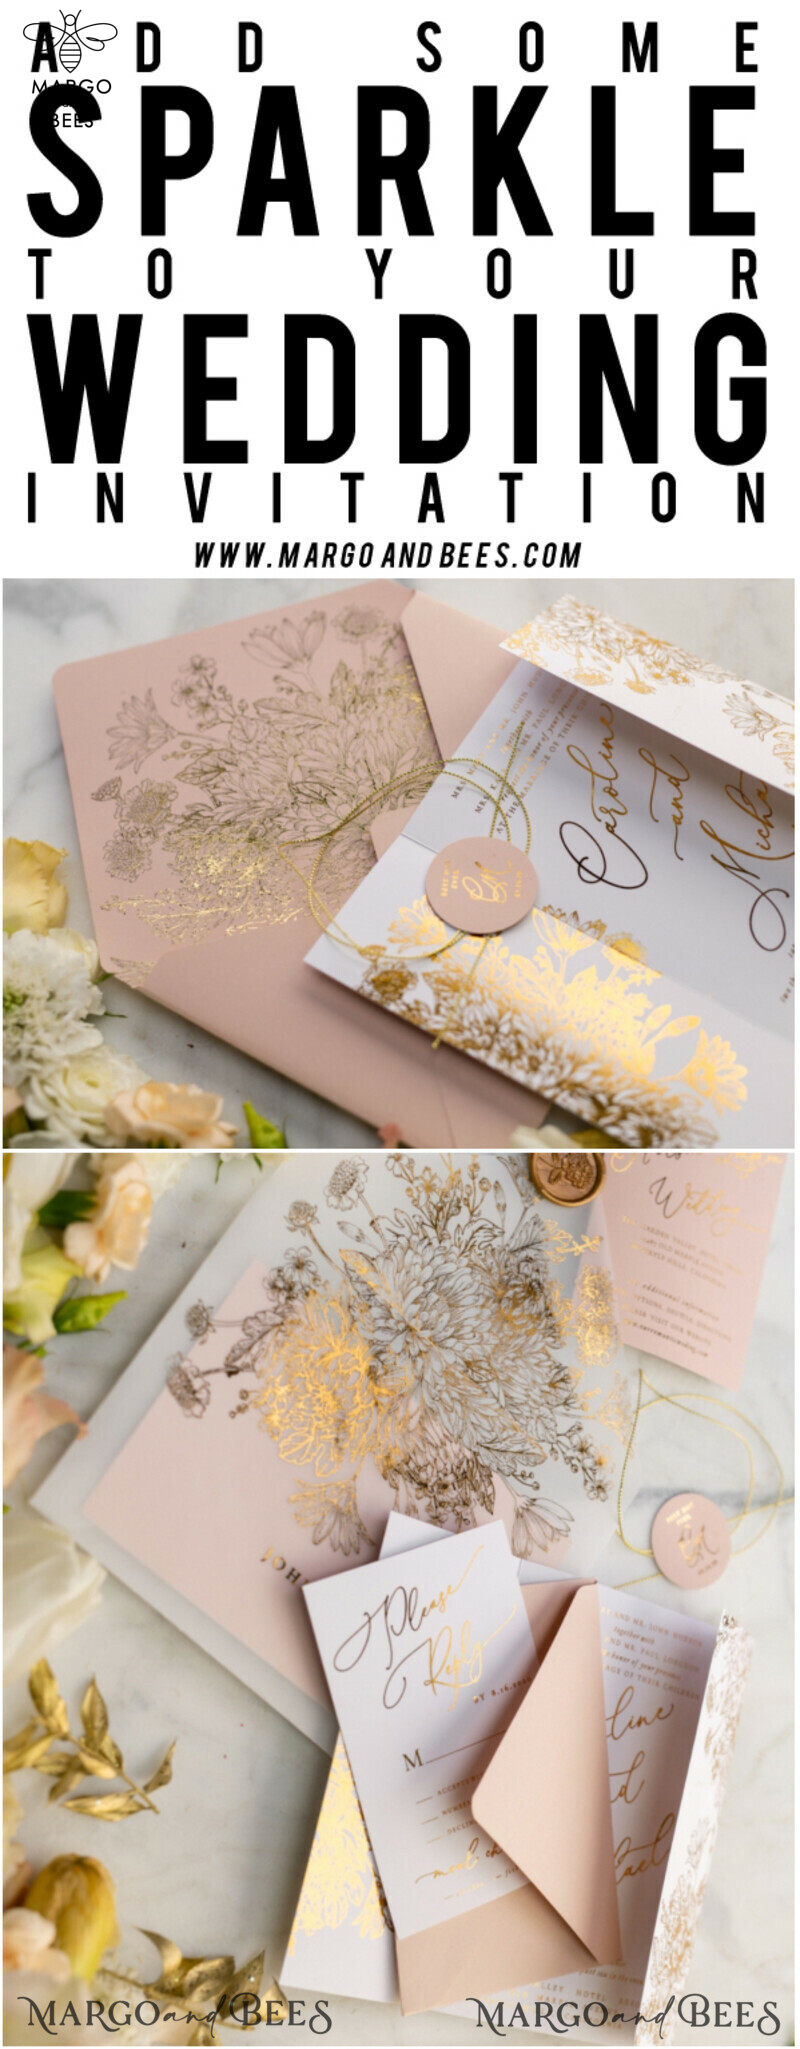 Elegant Arabic Golden Wedding Invitations with Glamour Gold Foil and Romantic Blush Pink - Exquisite Bespoke Indian Wedding Stationery-41